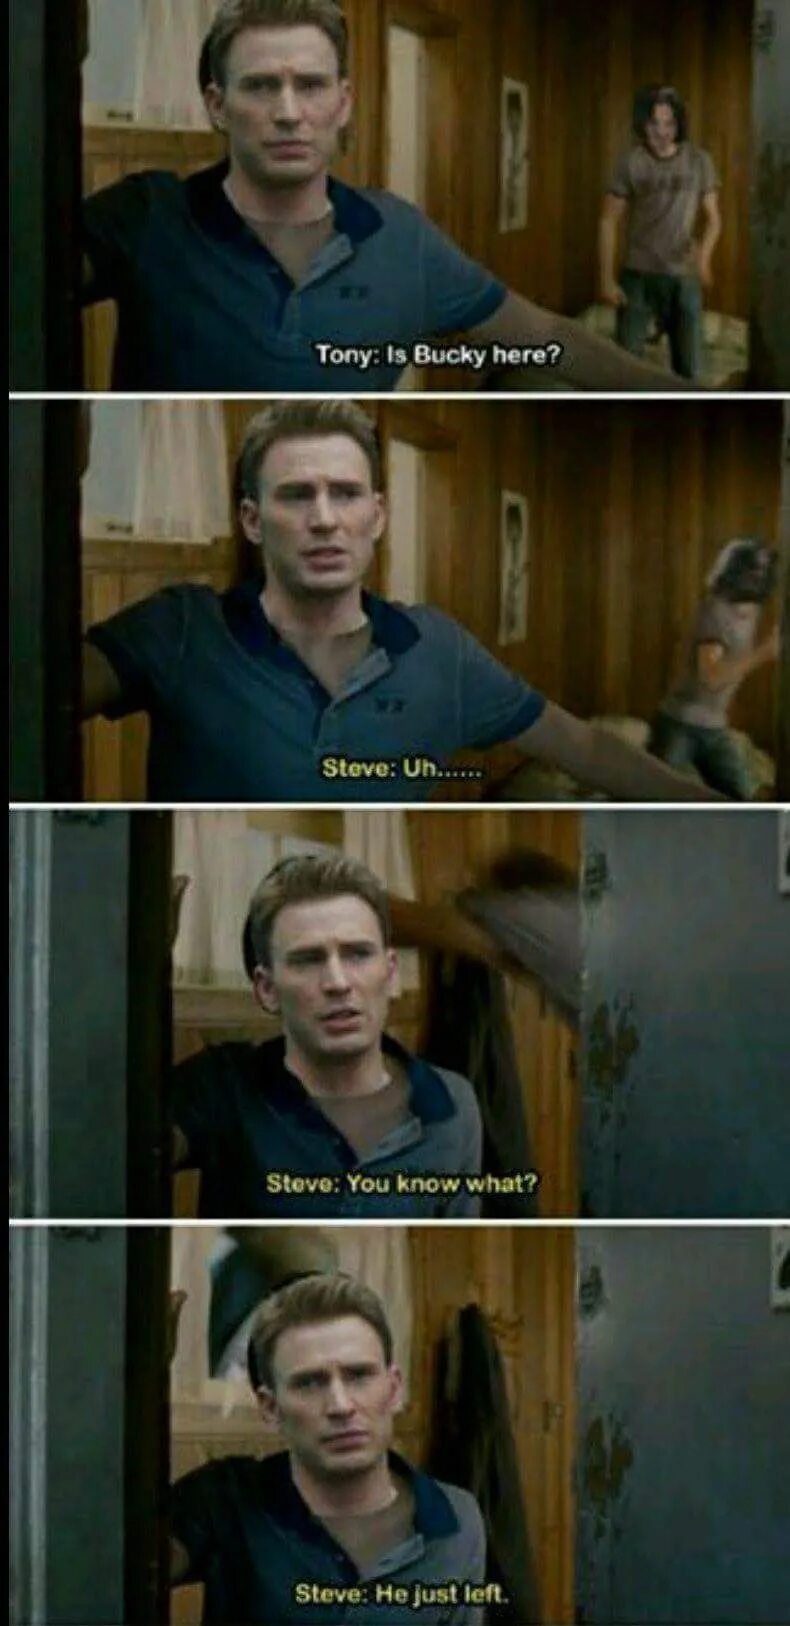 Just he leave has. He just left. Just Steve. Steve: what are you going.